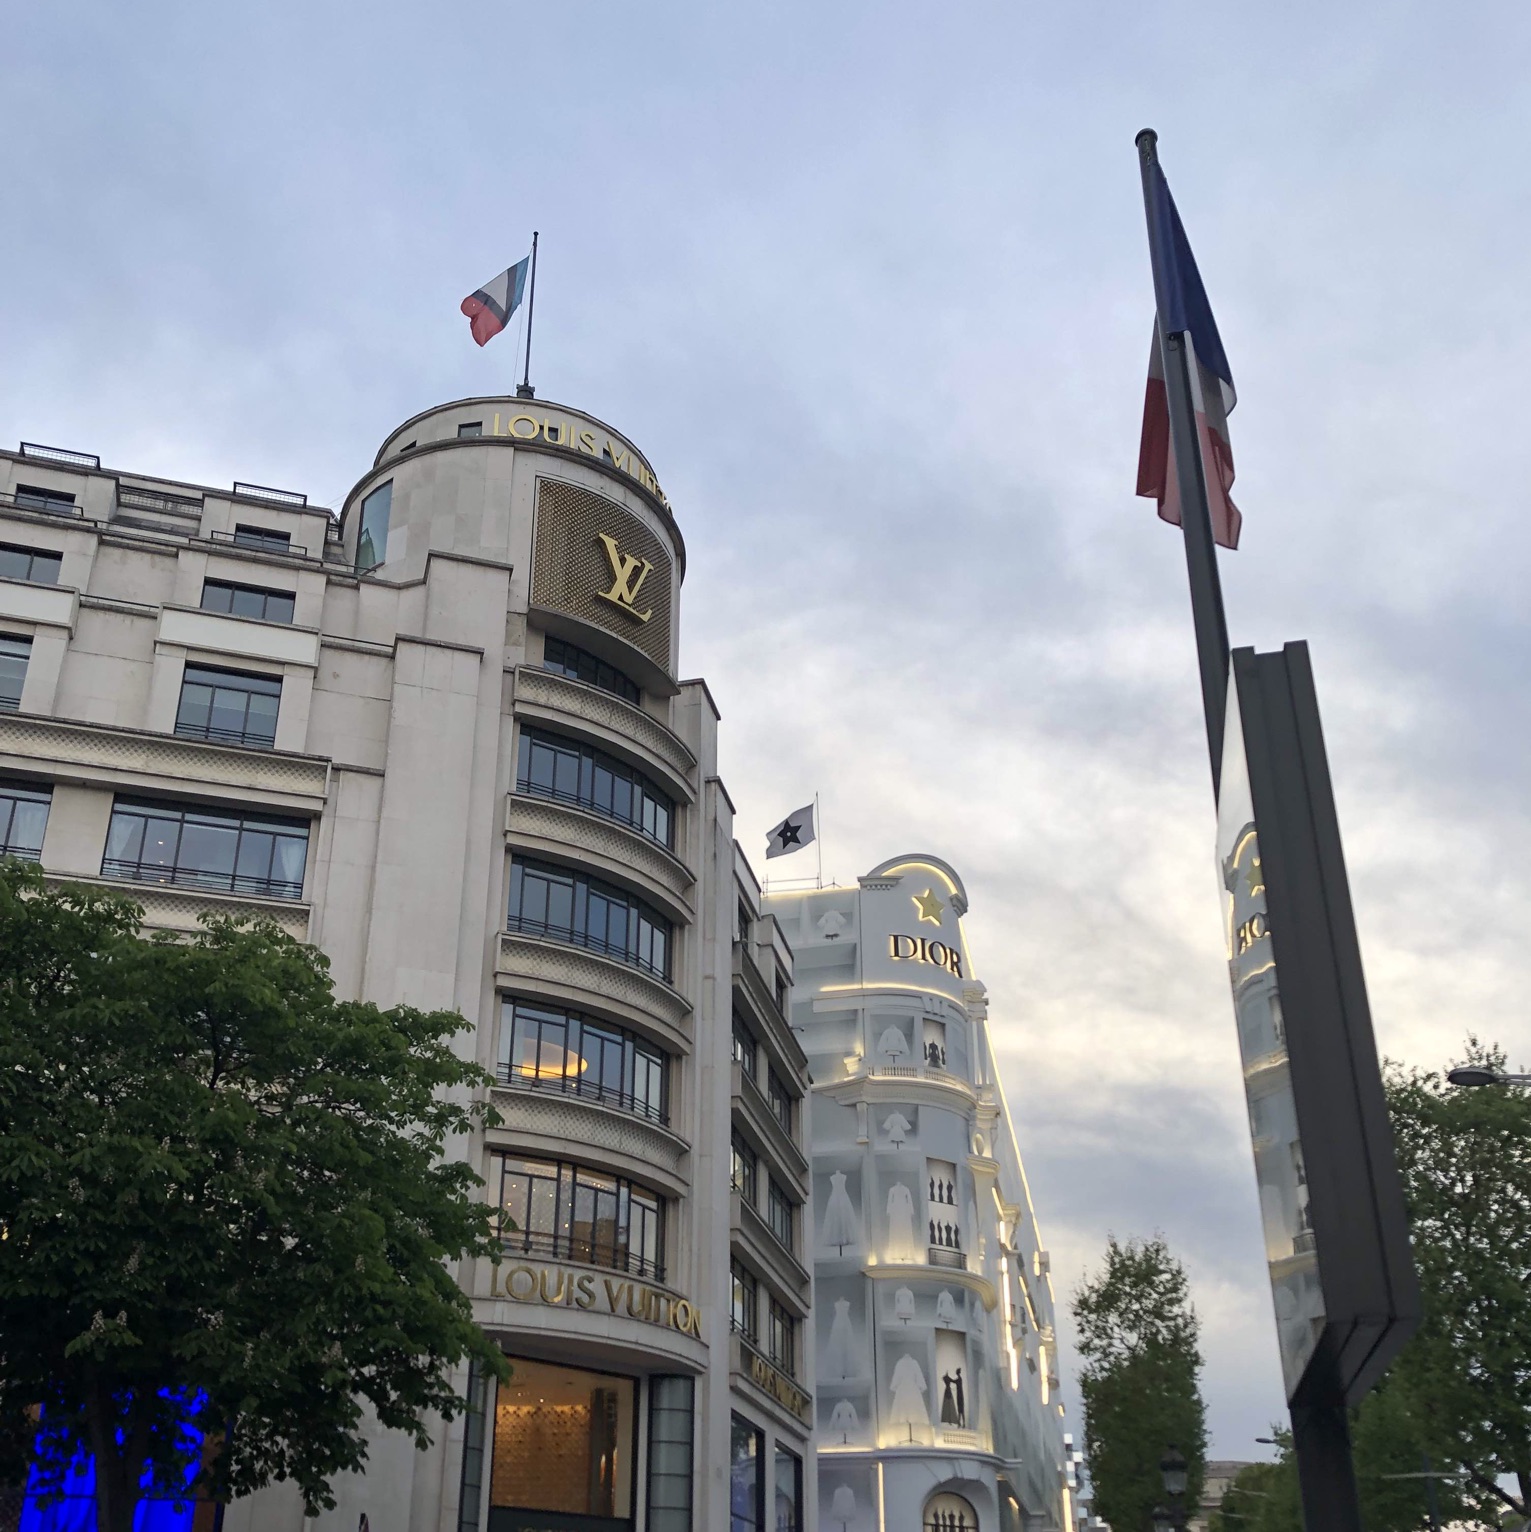 Vuitton to open hotel on Champs Elysees, market sources say